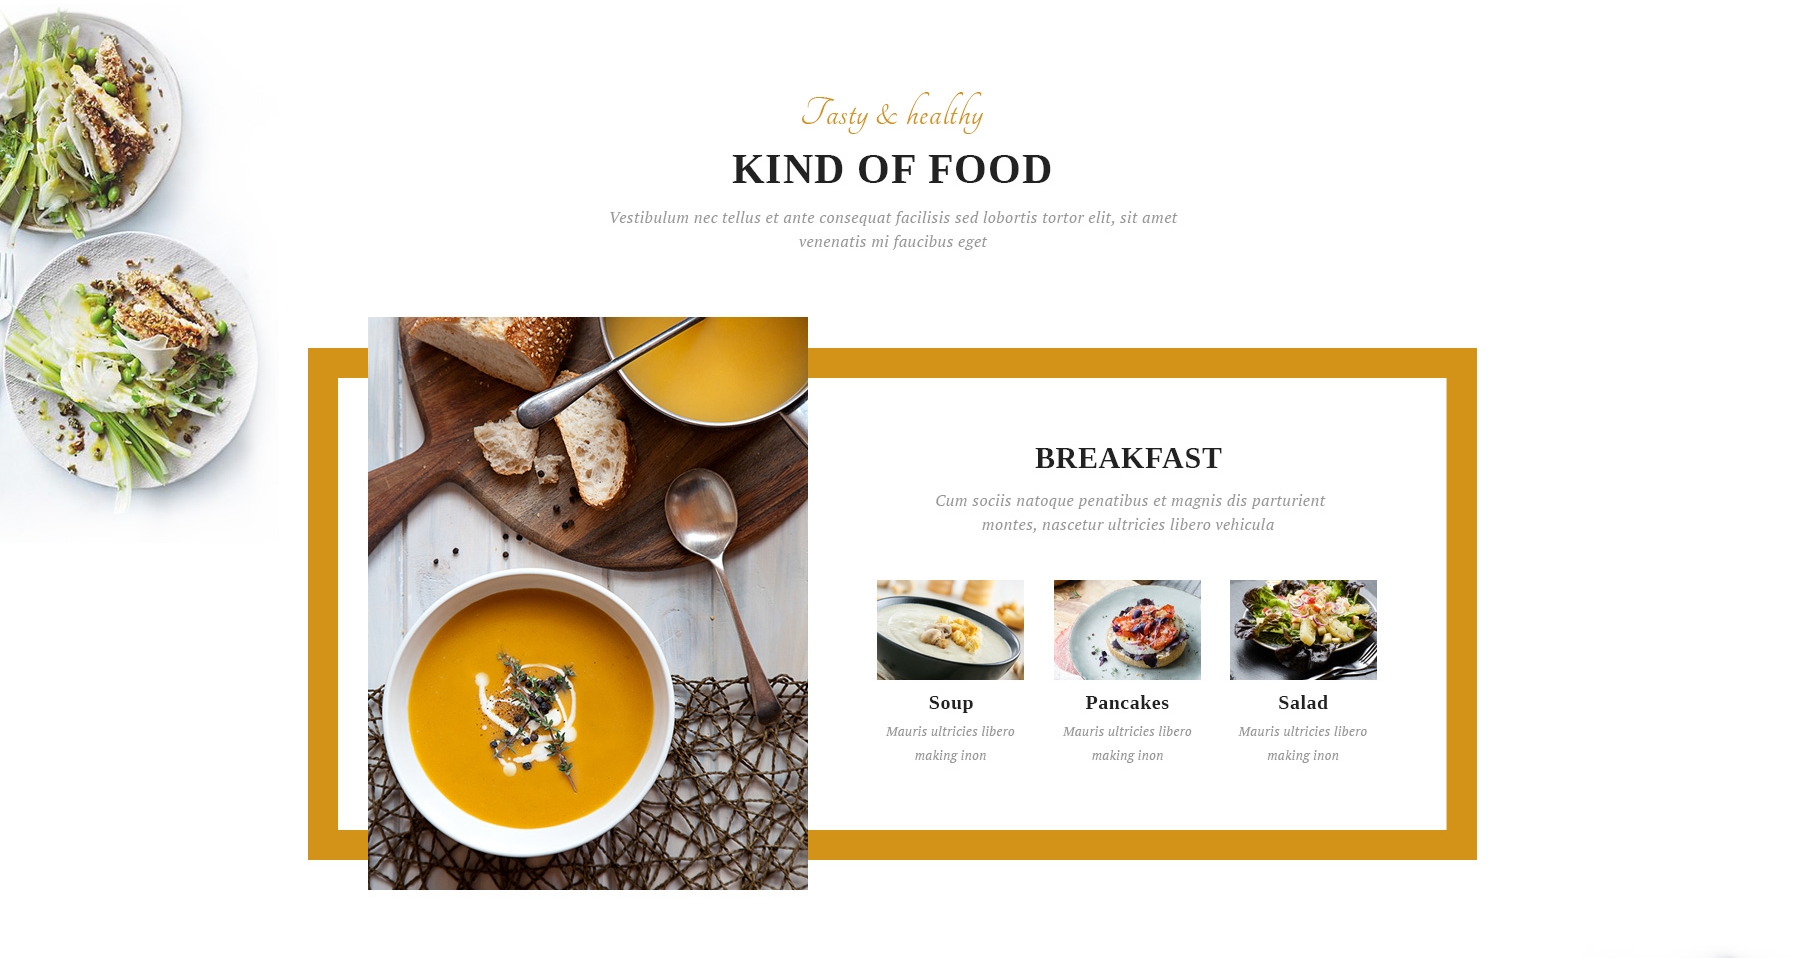 Mobile Bootstrap Hotel Theme